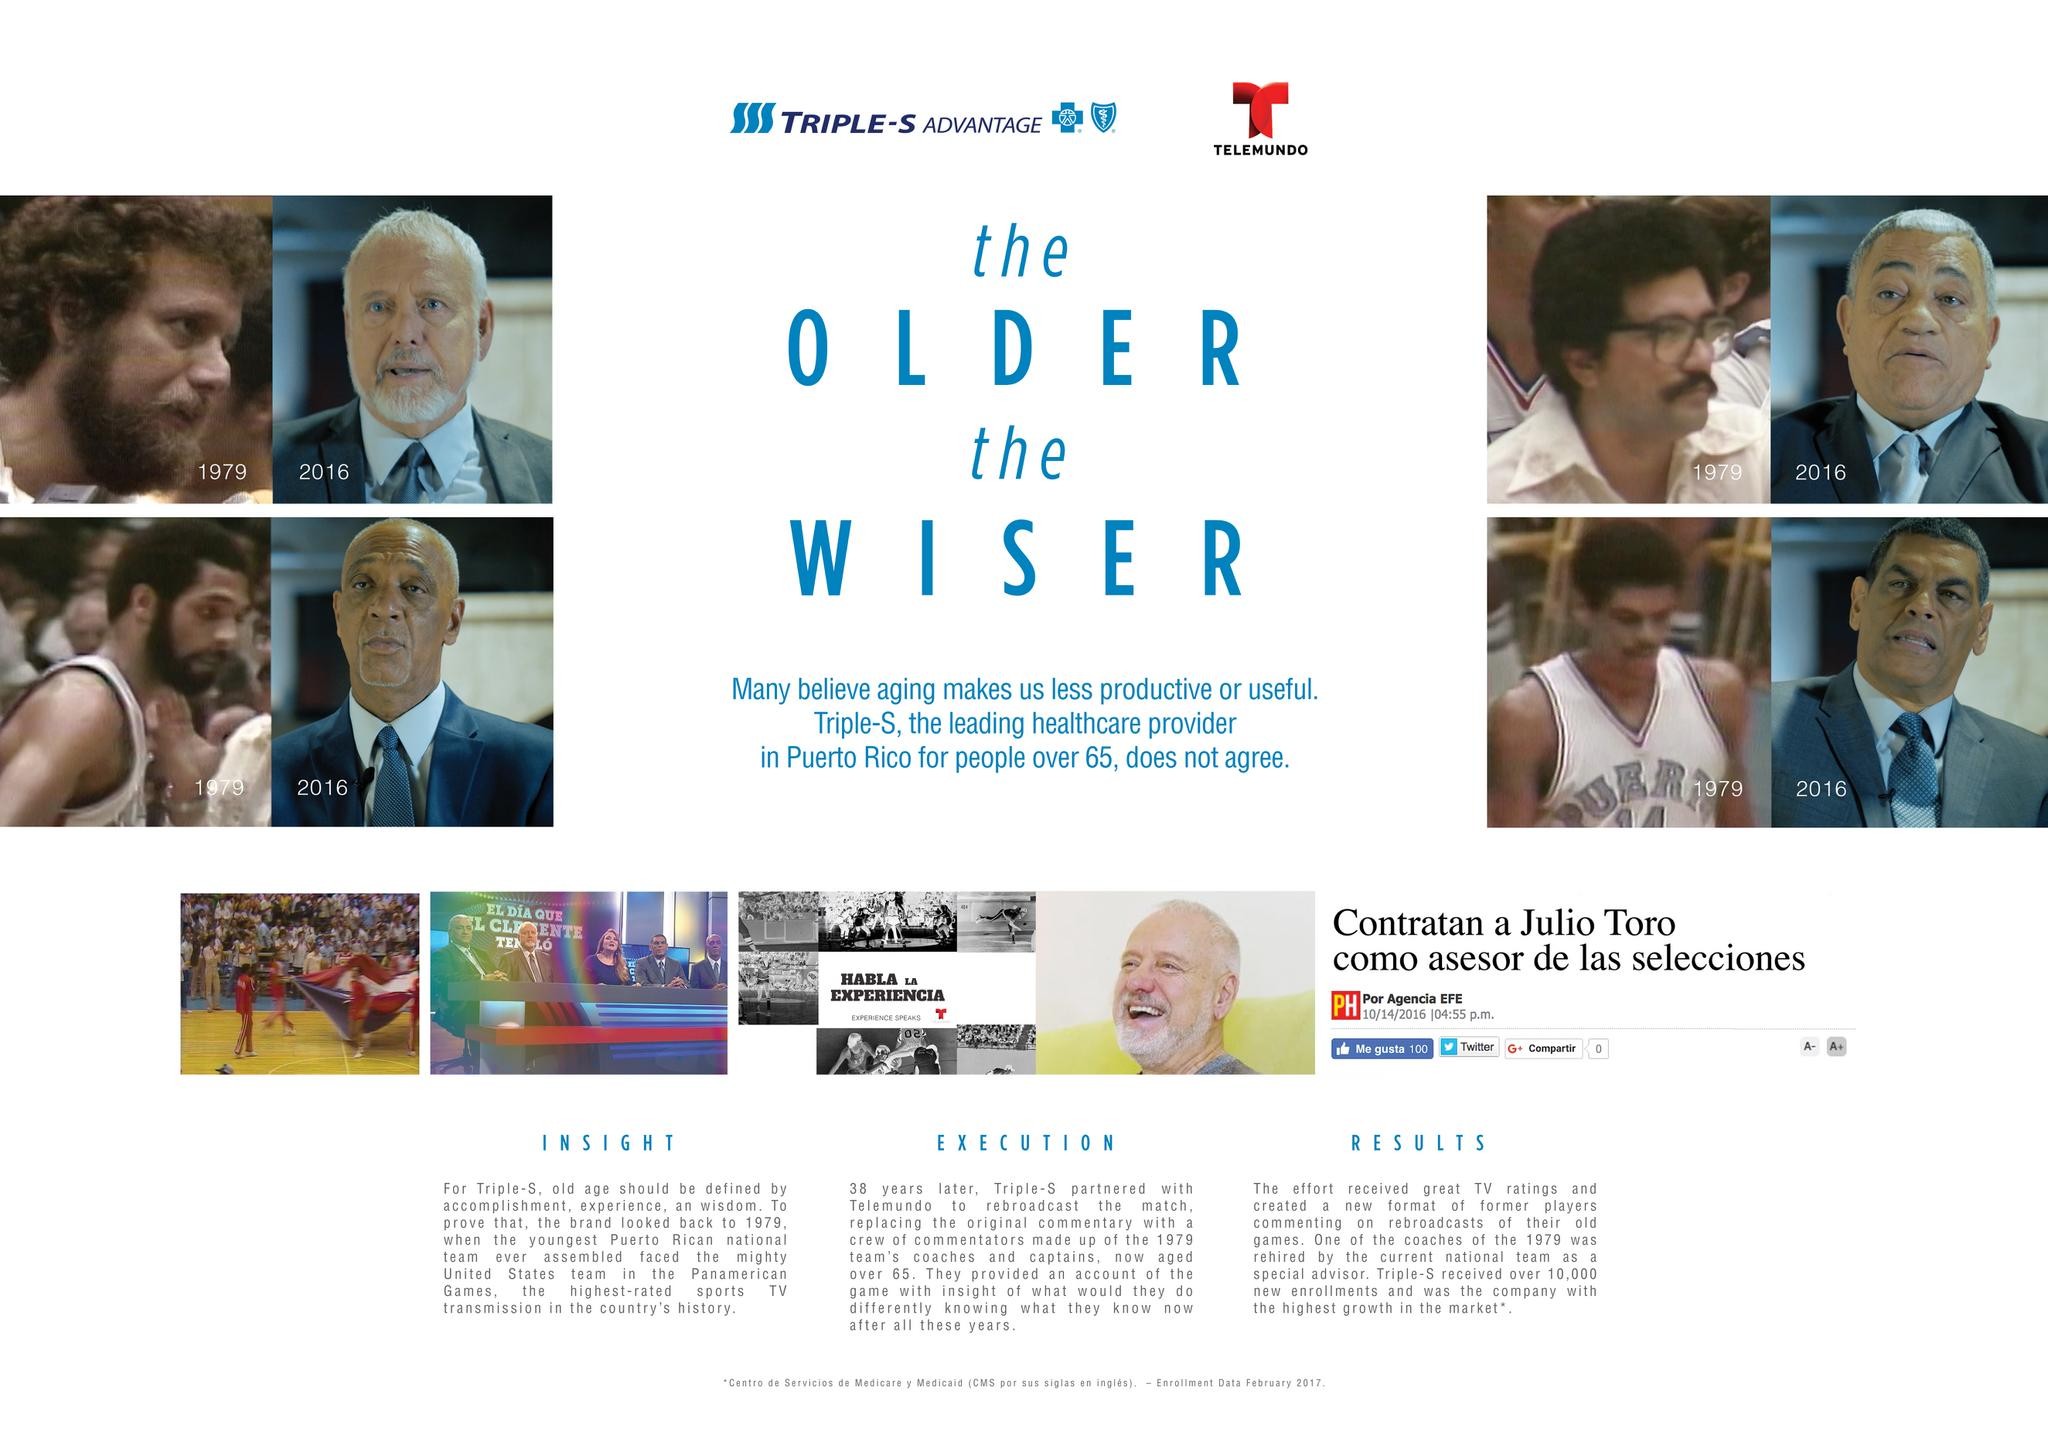 The Older, The Wiser